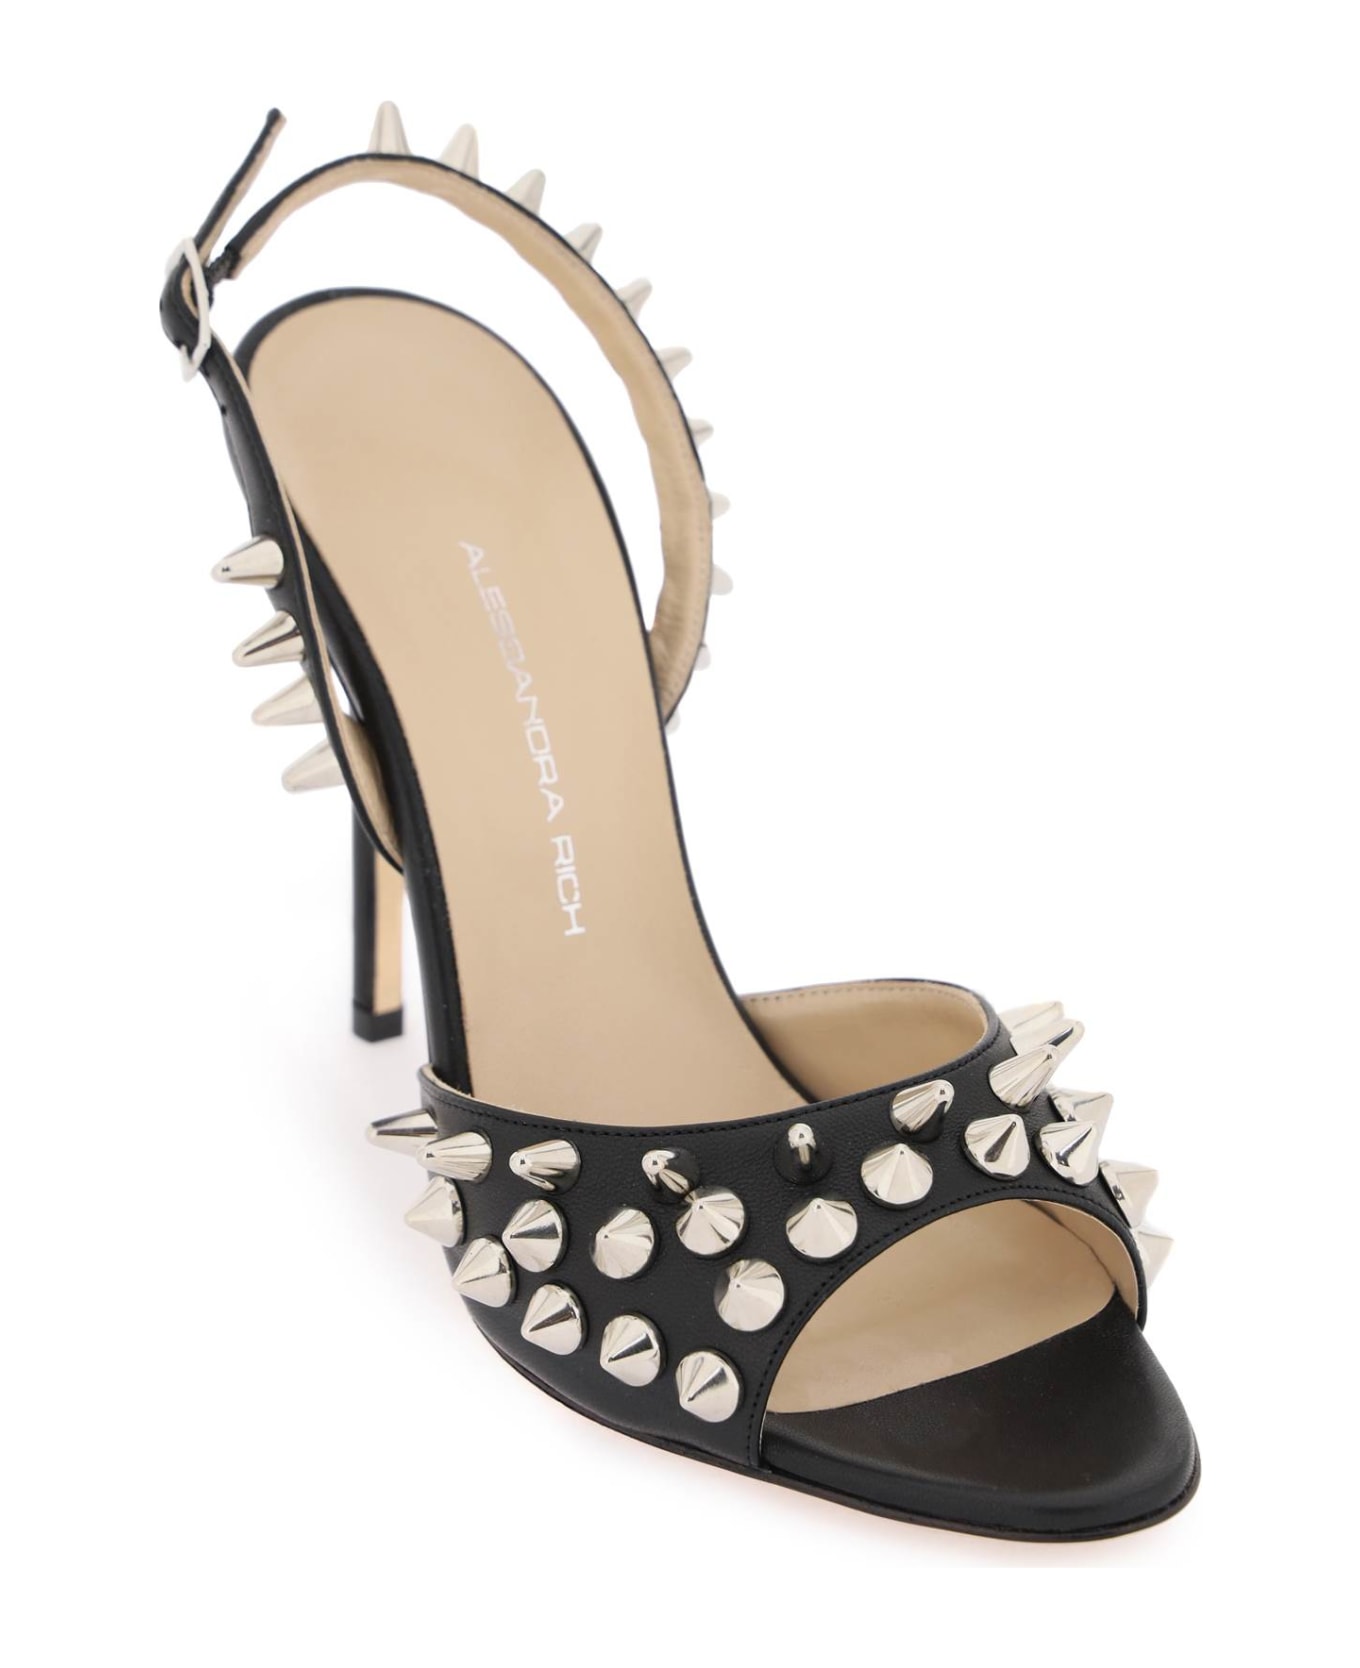 Alessandra Rich Sandals With Spikes - BLACK (Black)